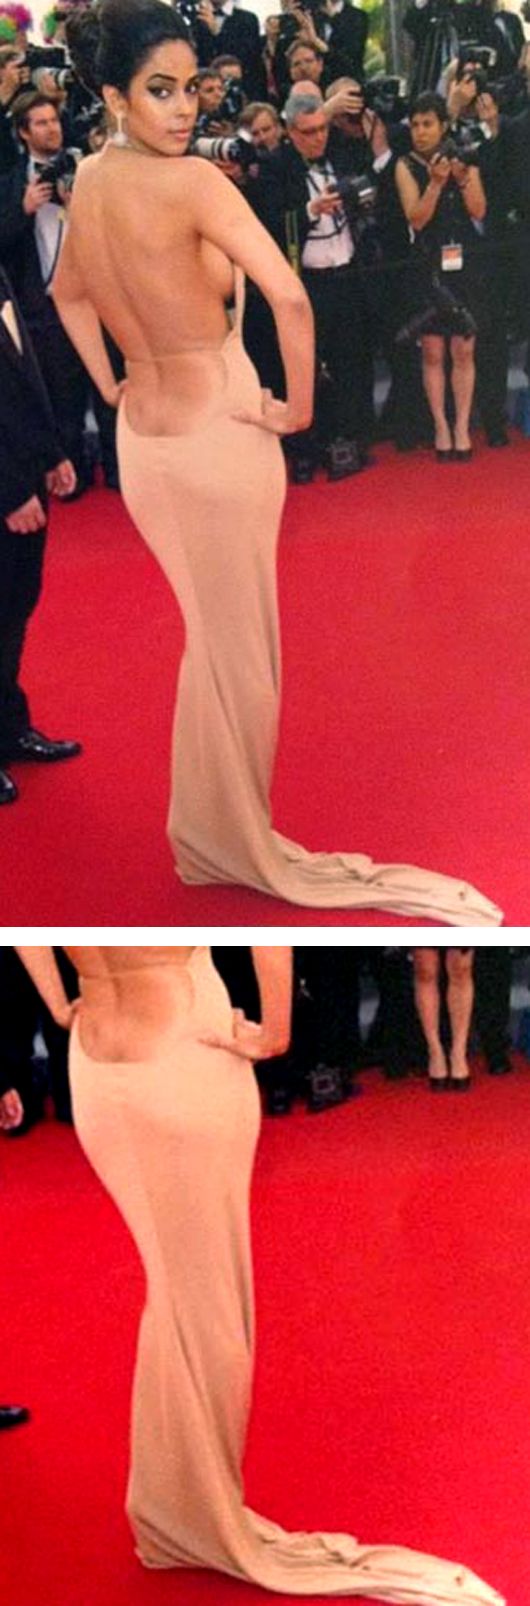 Get This Look: Mallika Sherawat’s (almost) Nude Gown at Cannes *